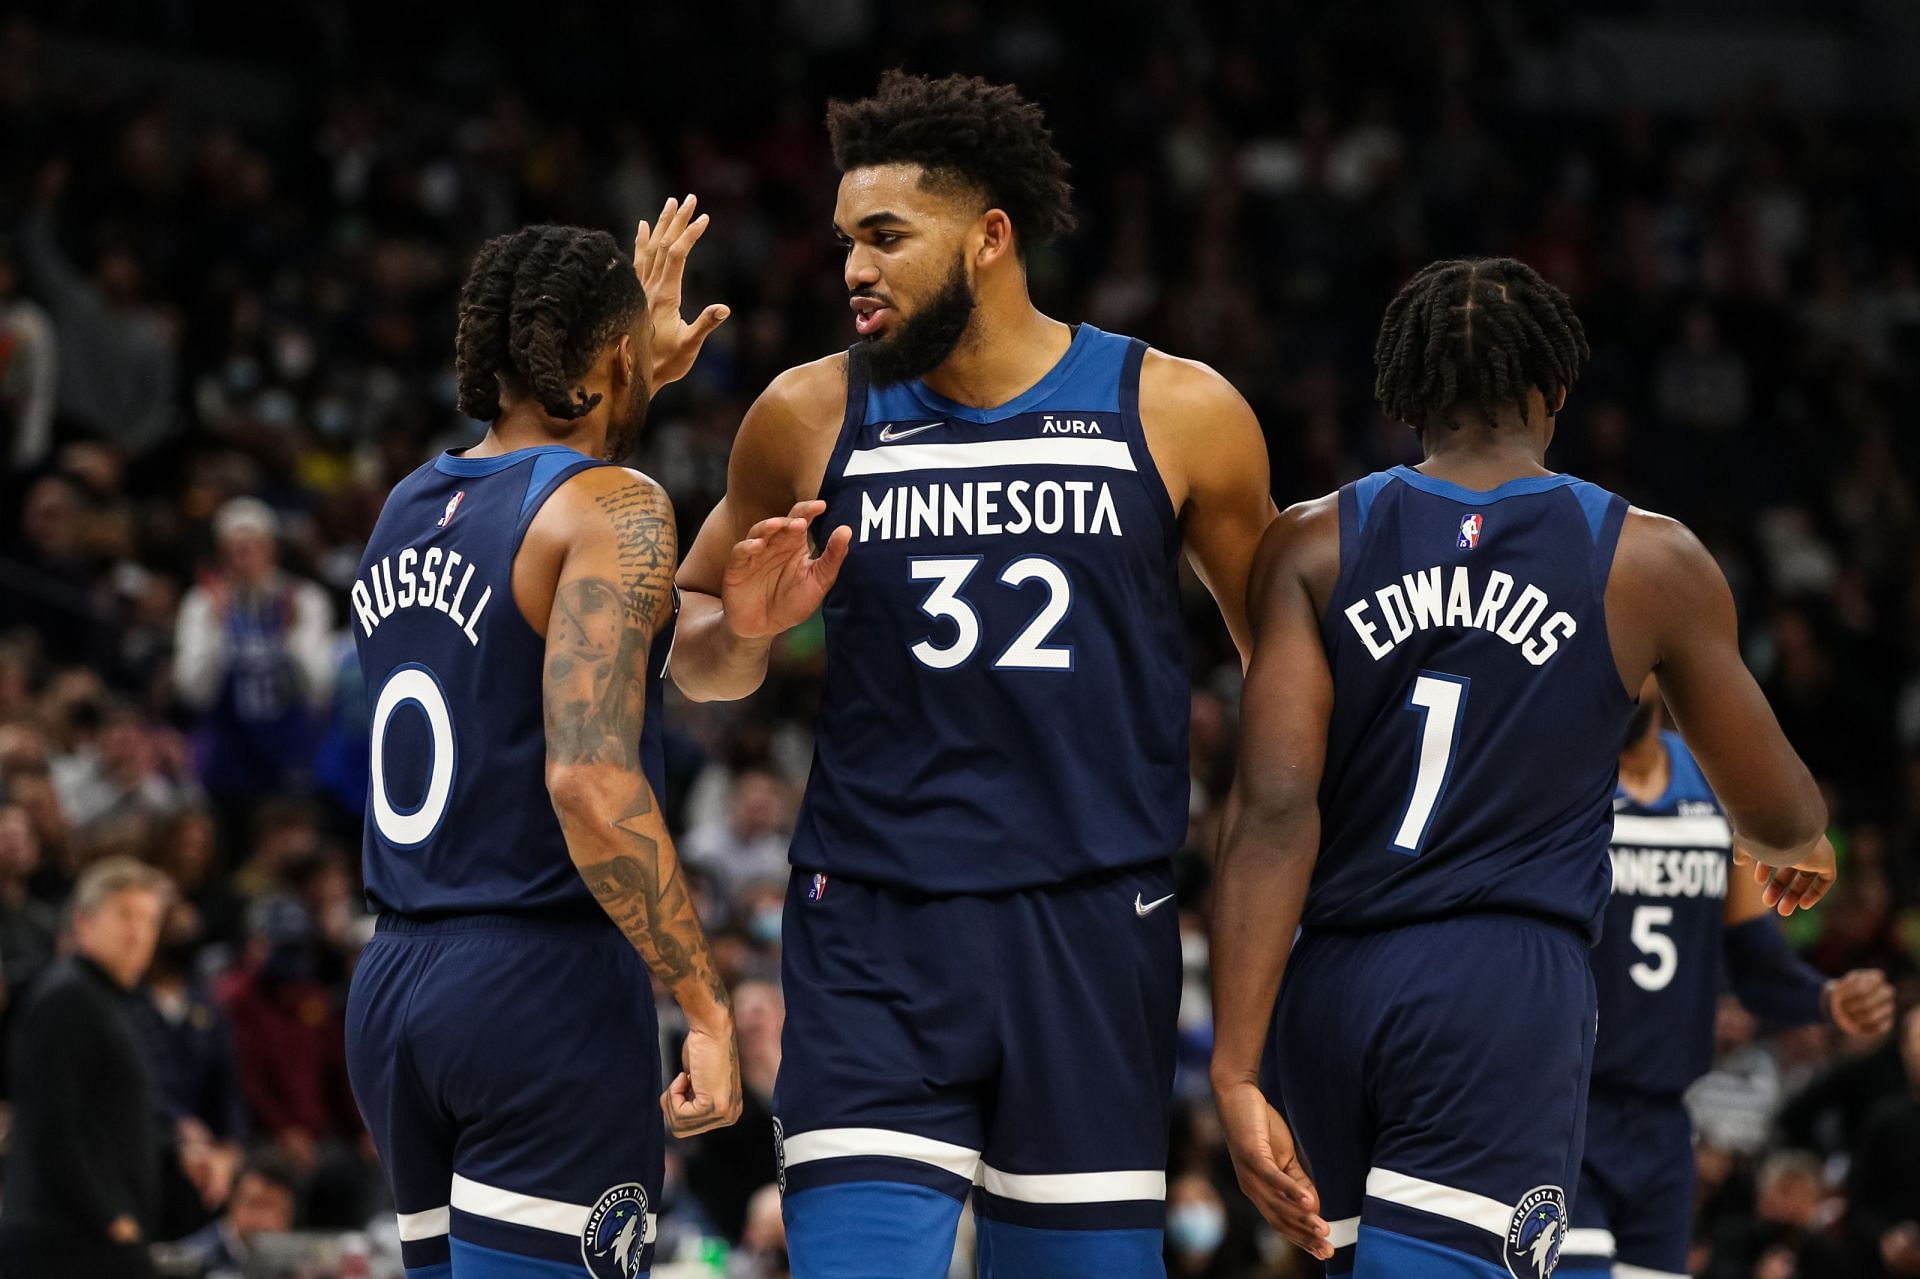 The Minnesota Timberwovles are still pushing to get the 6th seed in the West and avoid the play-in tournament. [Photo: Hoops Habit]